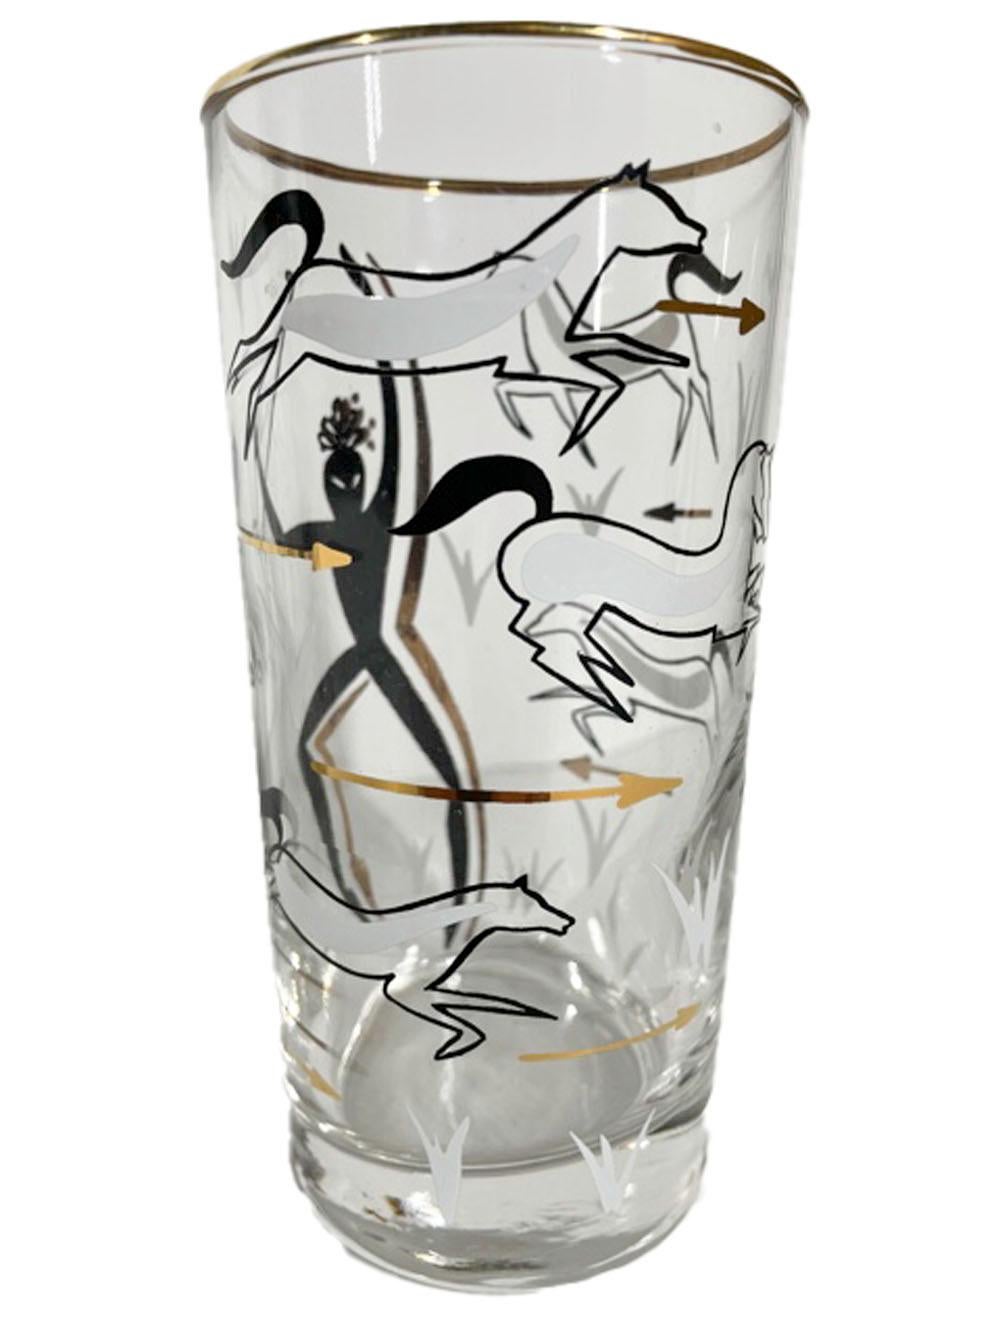 Eight Mid-Century Modern highball glasses decorated in black and white enamel with 22k gold, depicting a hunter with a bow among running horses and flying arrows.